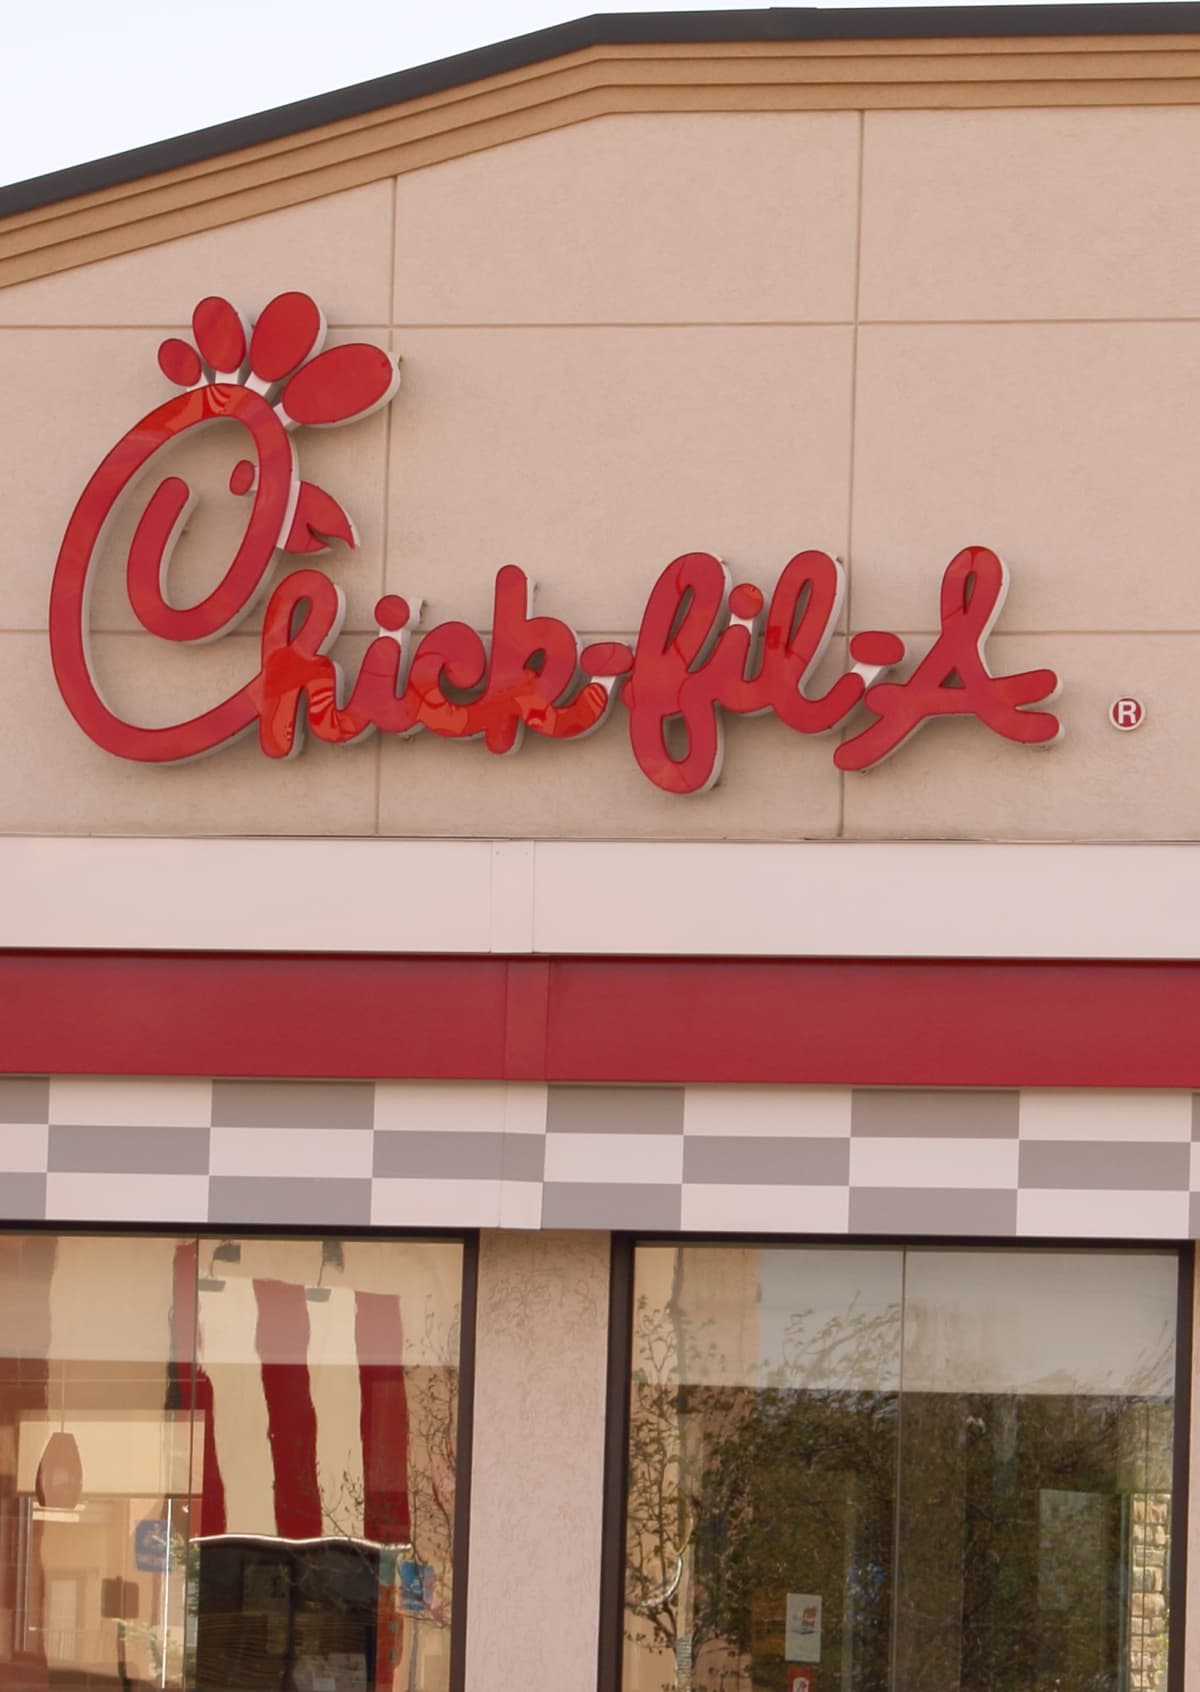 HOUSTON, TEXAS - JULY 05: A Chick-fil-A restaurant sign is seen on July 05, 2022 in Houston, Texas. According to an annual survey produced by the American Customer Satisfaction Index (ACSI), Chick-fil-A has maintained its position as America's favorite restaurant for the eighth straight year in a row.  (Photo by Brandon Bell/Getty Images)